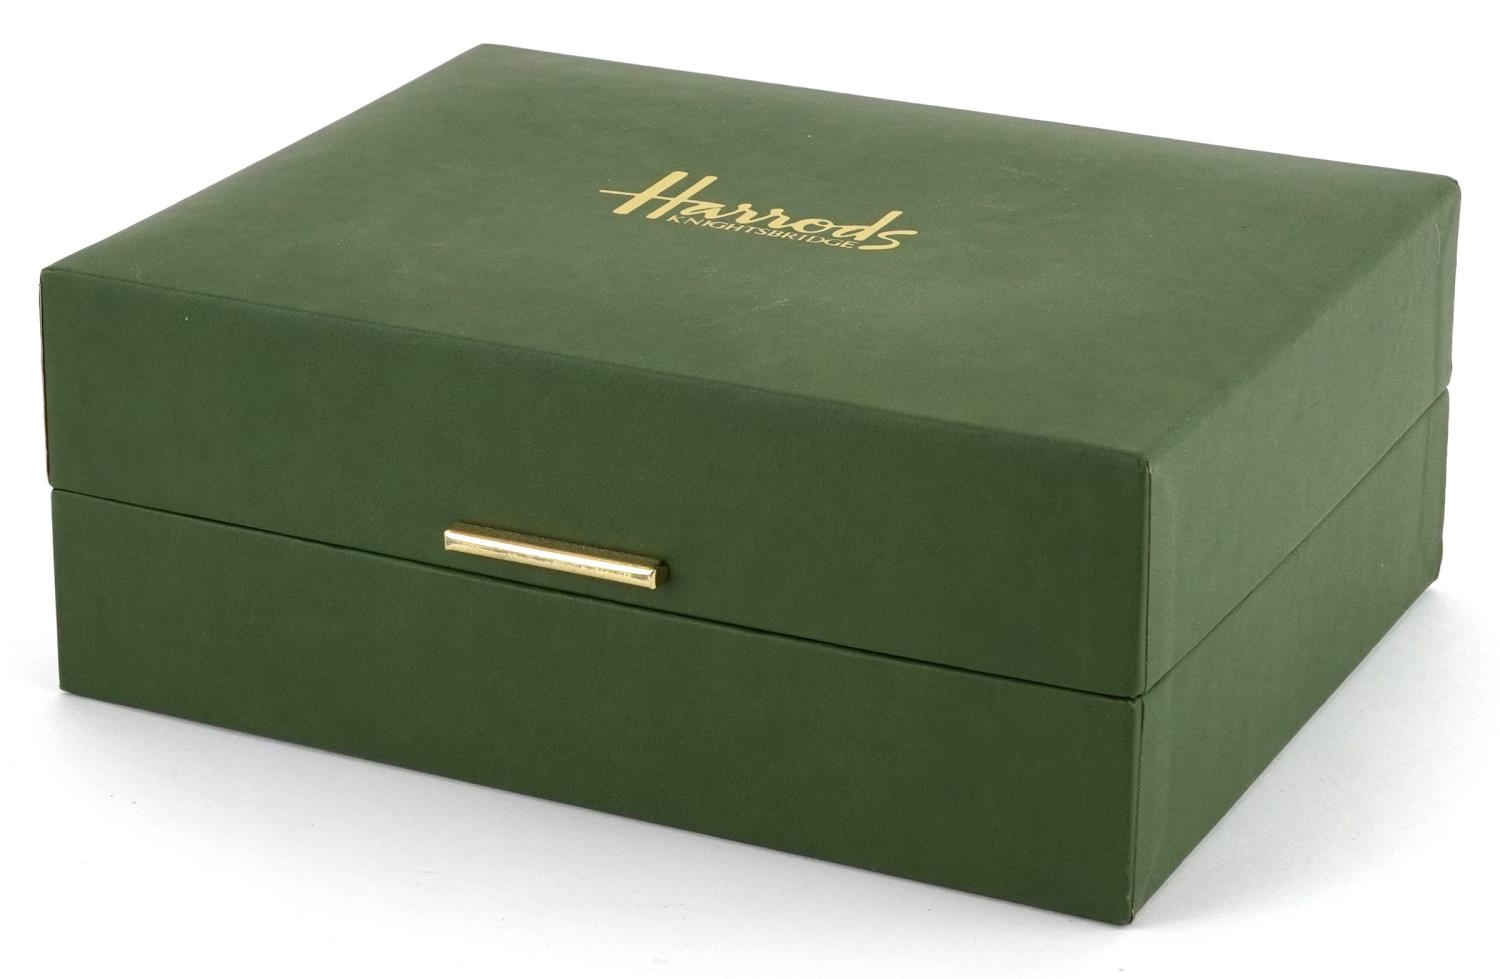 Pair of Harrods crystal glasses housed in a fitted box, each glass 8cm high - Image 7 of 7